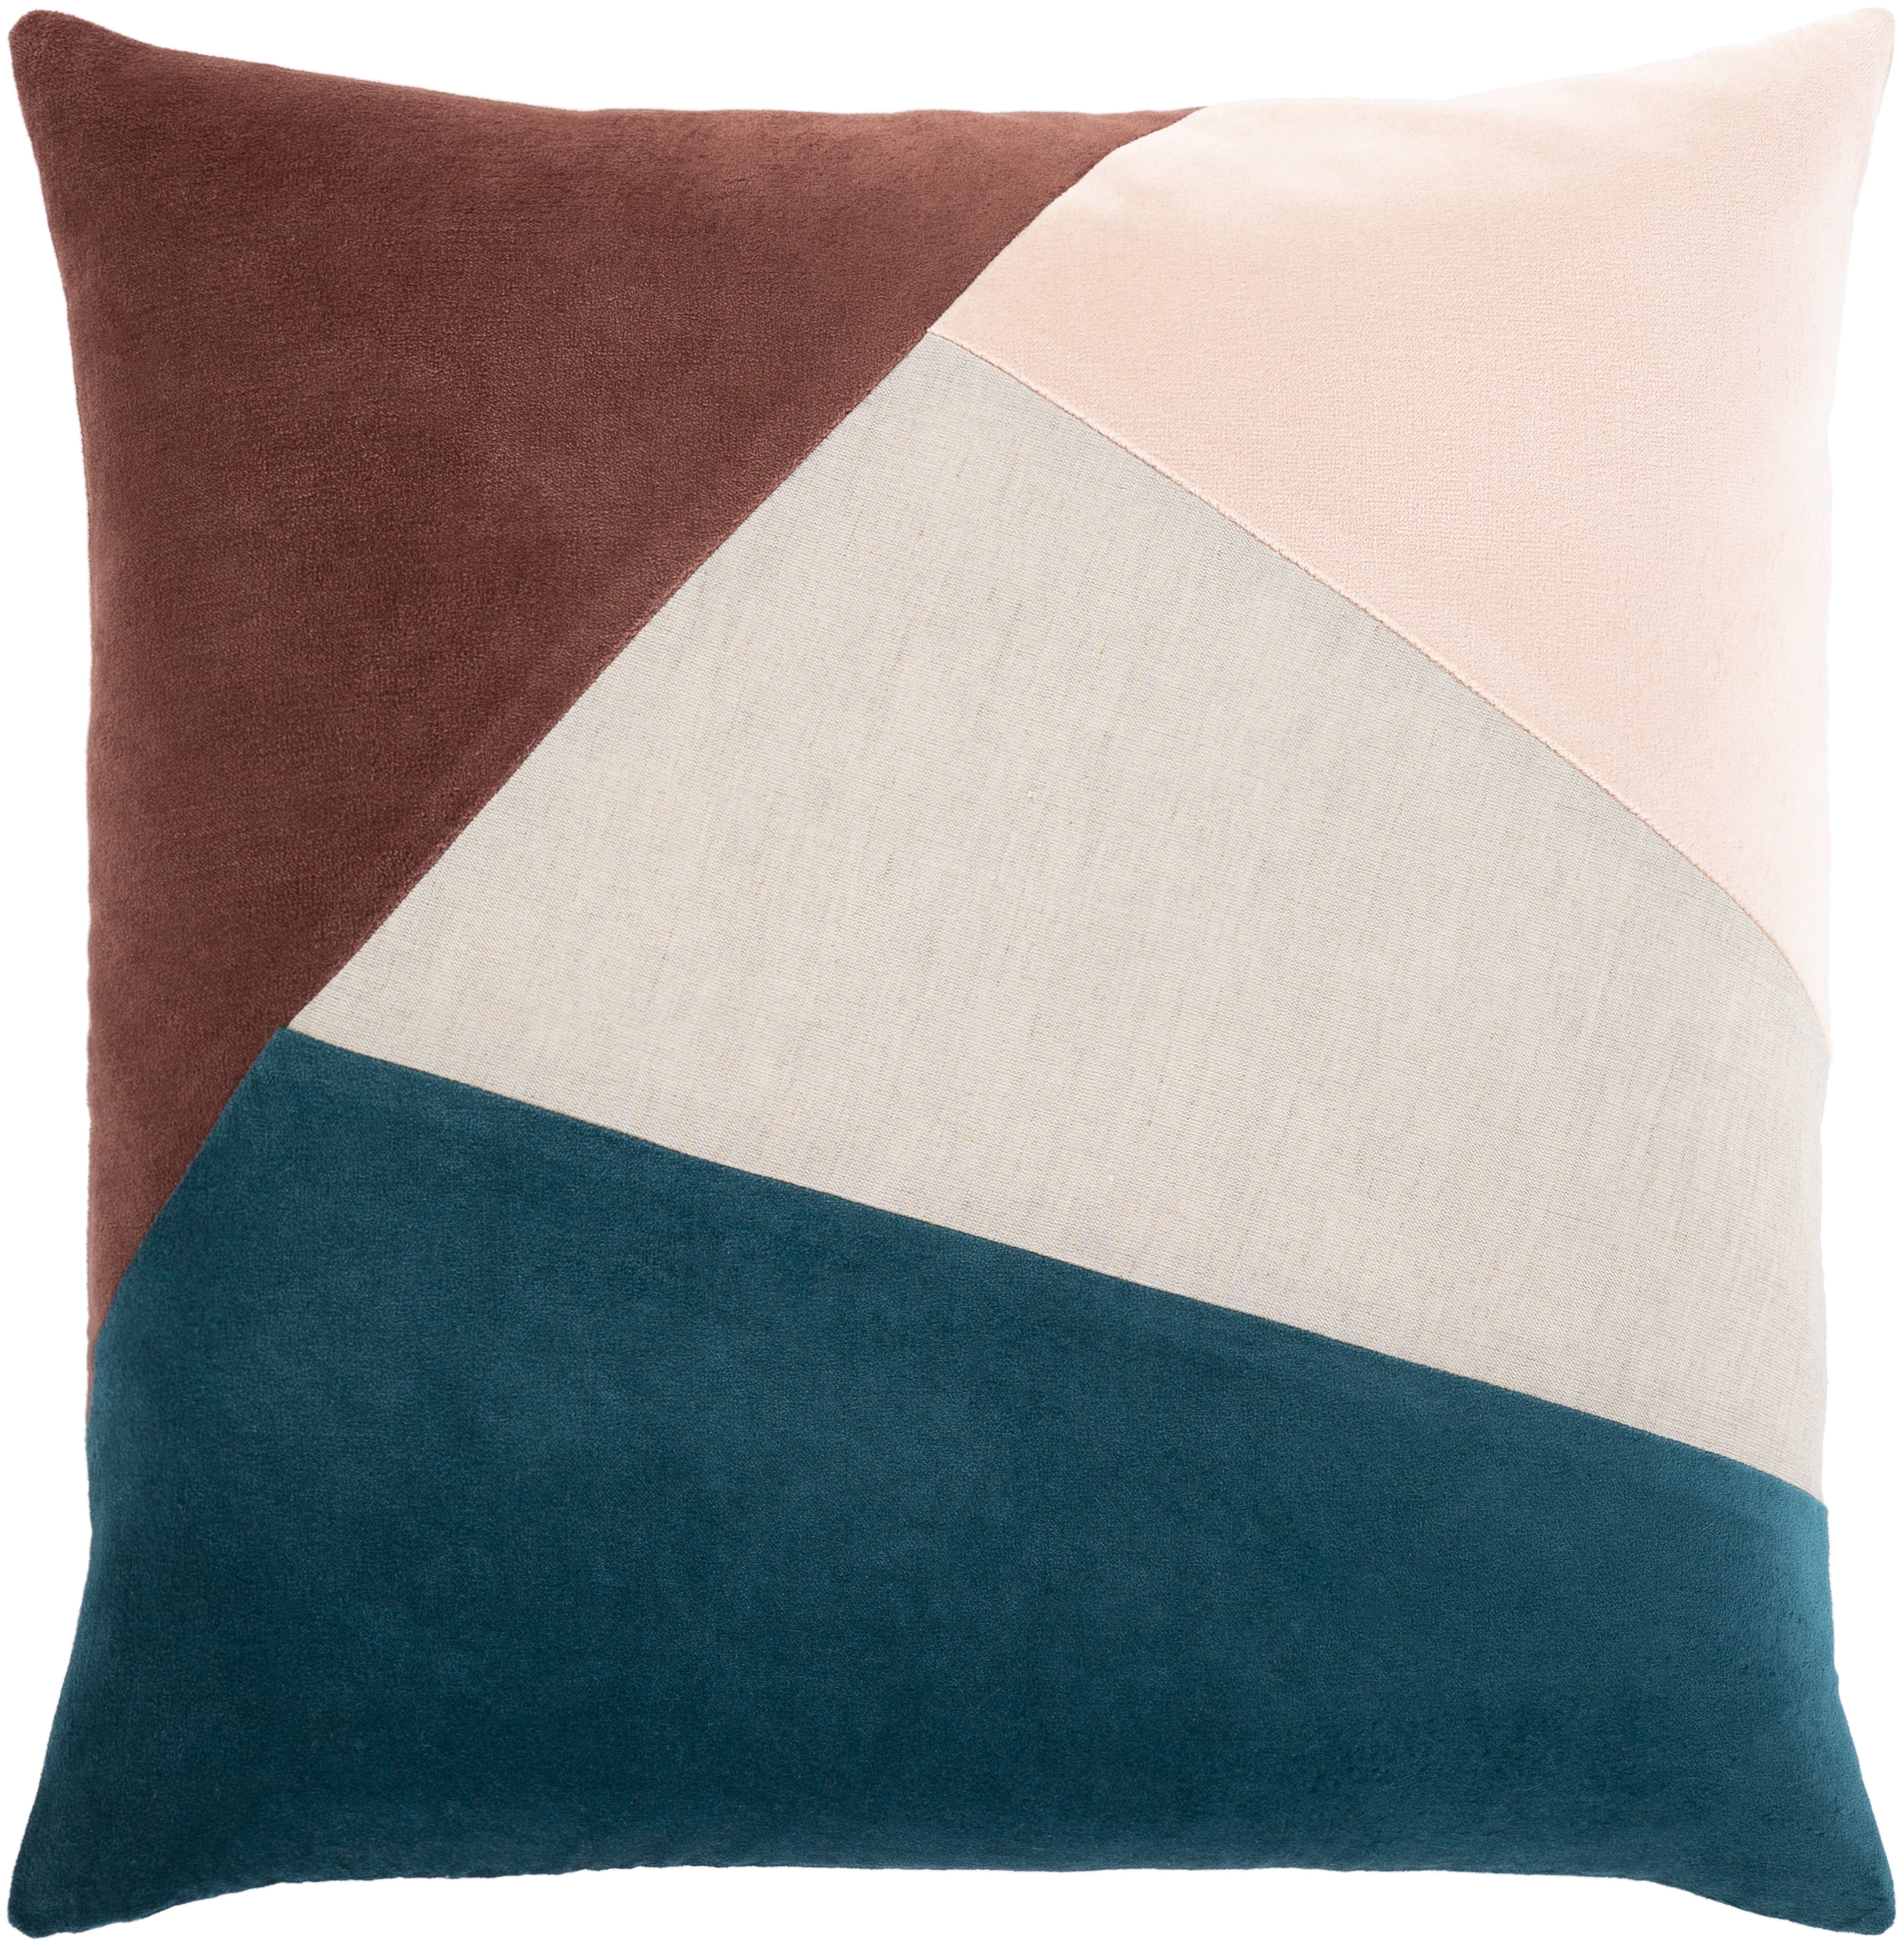 Moza Throw Pillow, 18" x 18", with poly insert - Surya